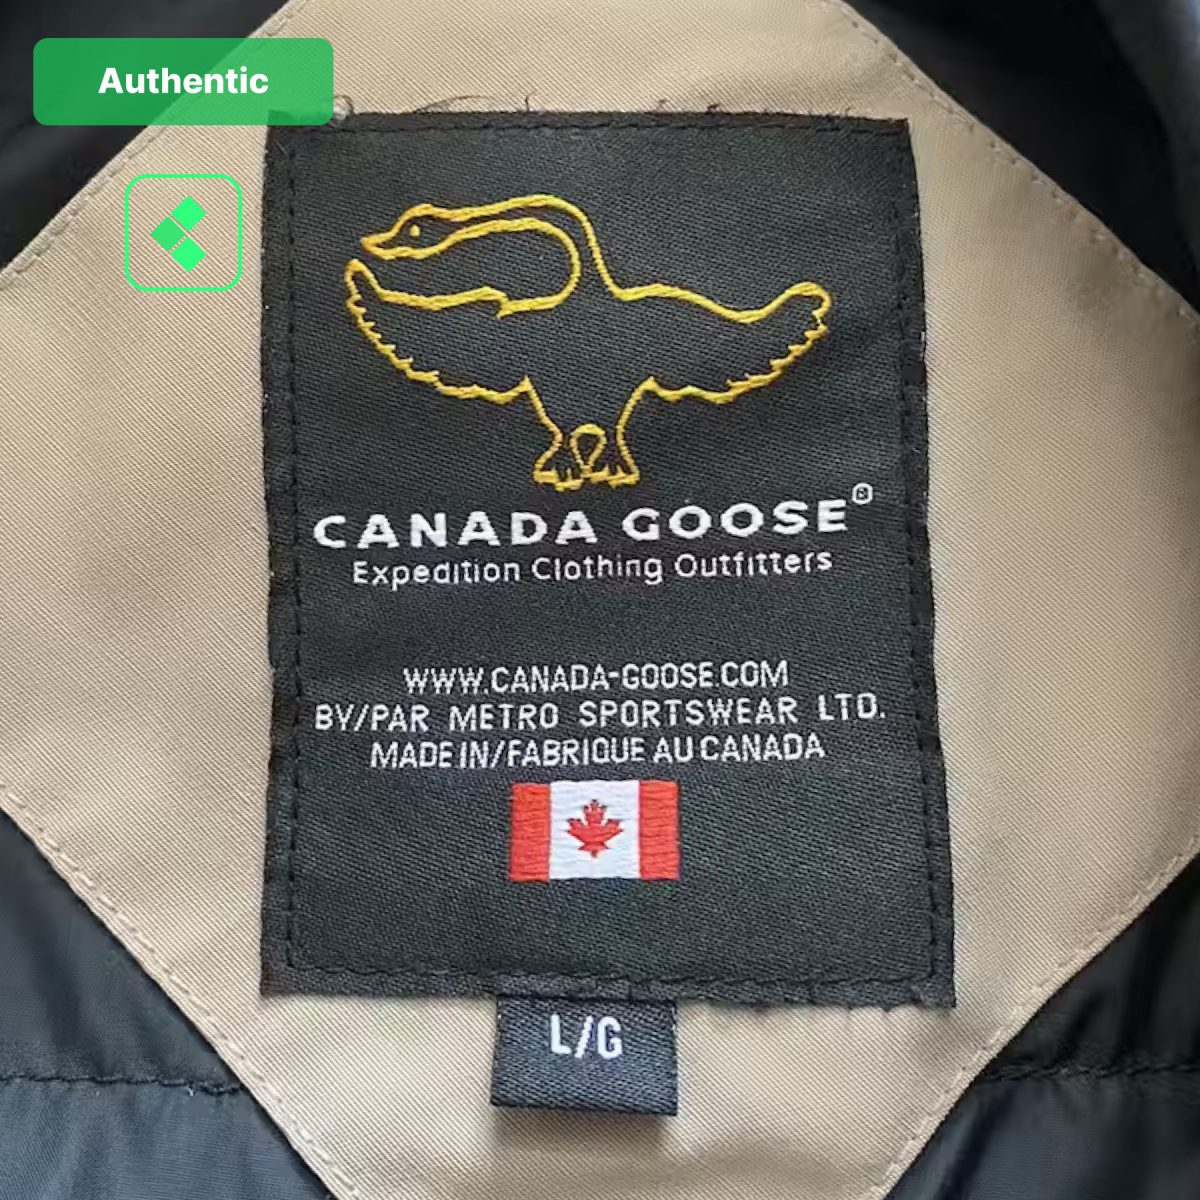 Example of an authentic Canada Goose jacket's neck label